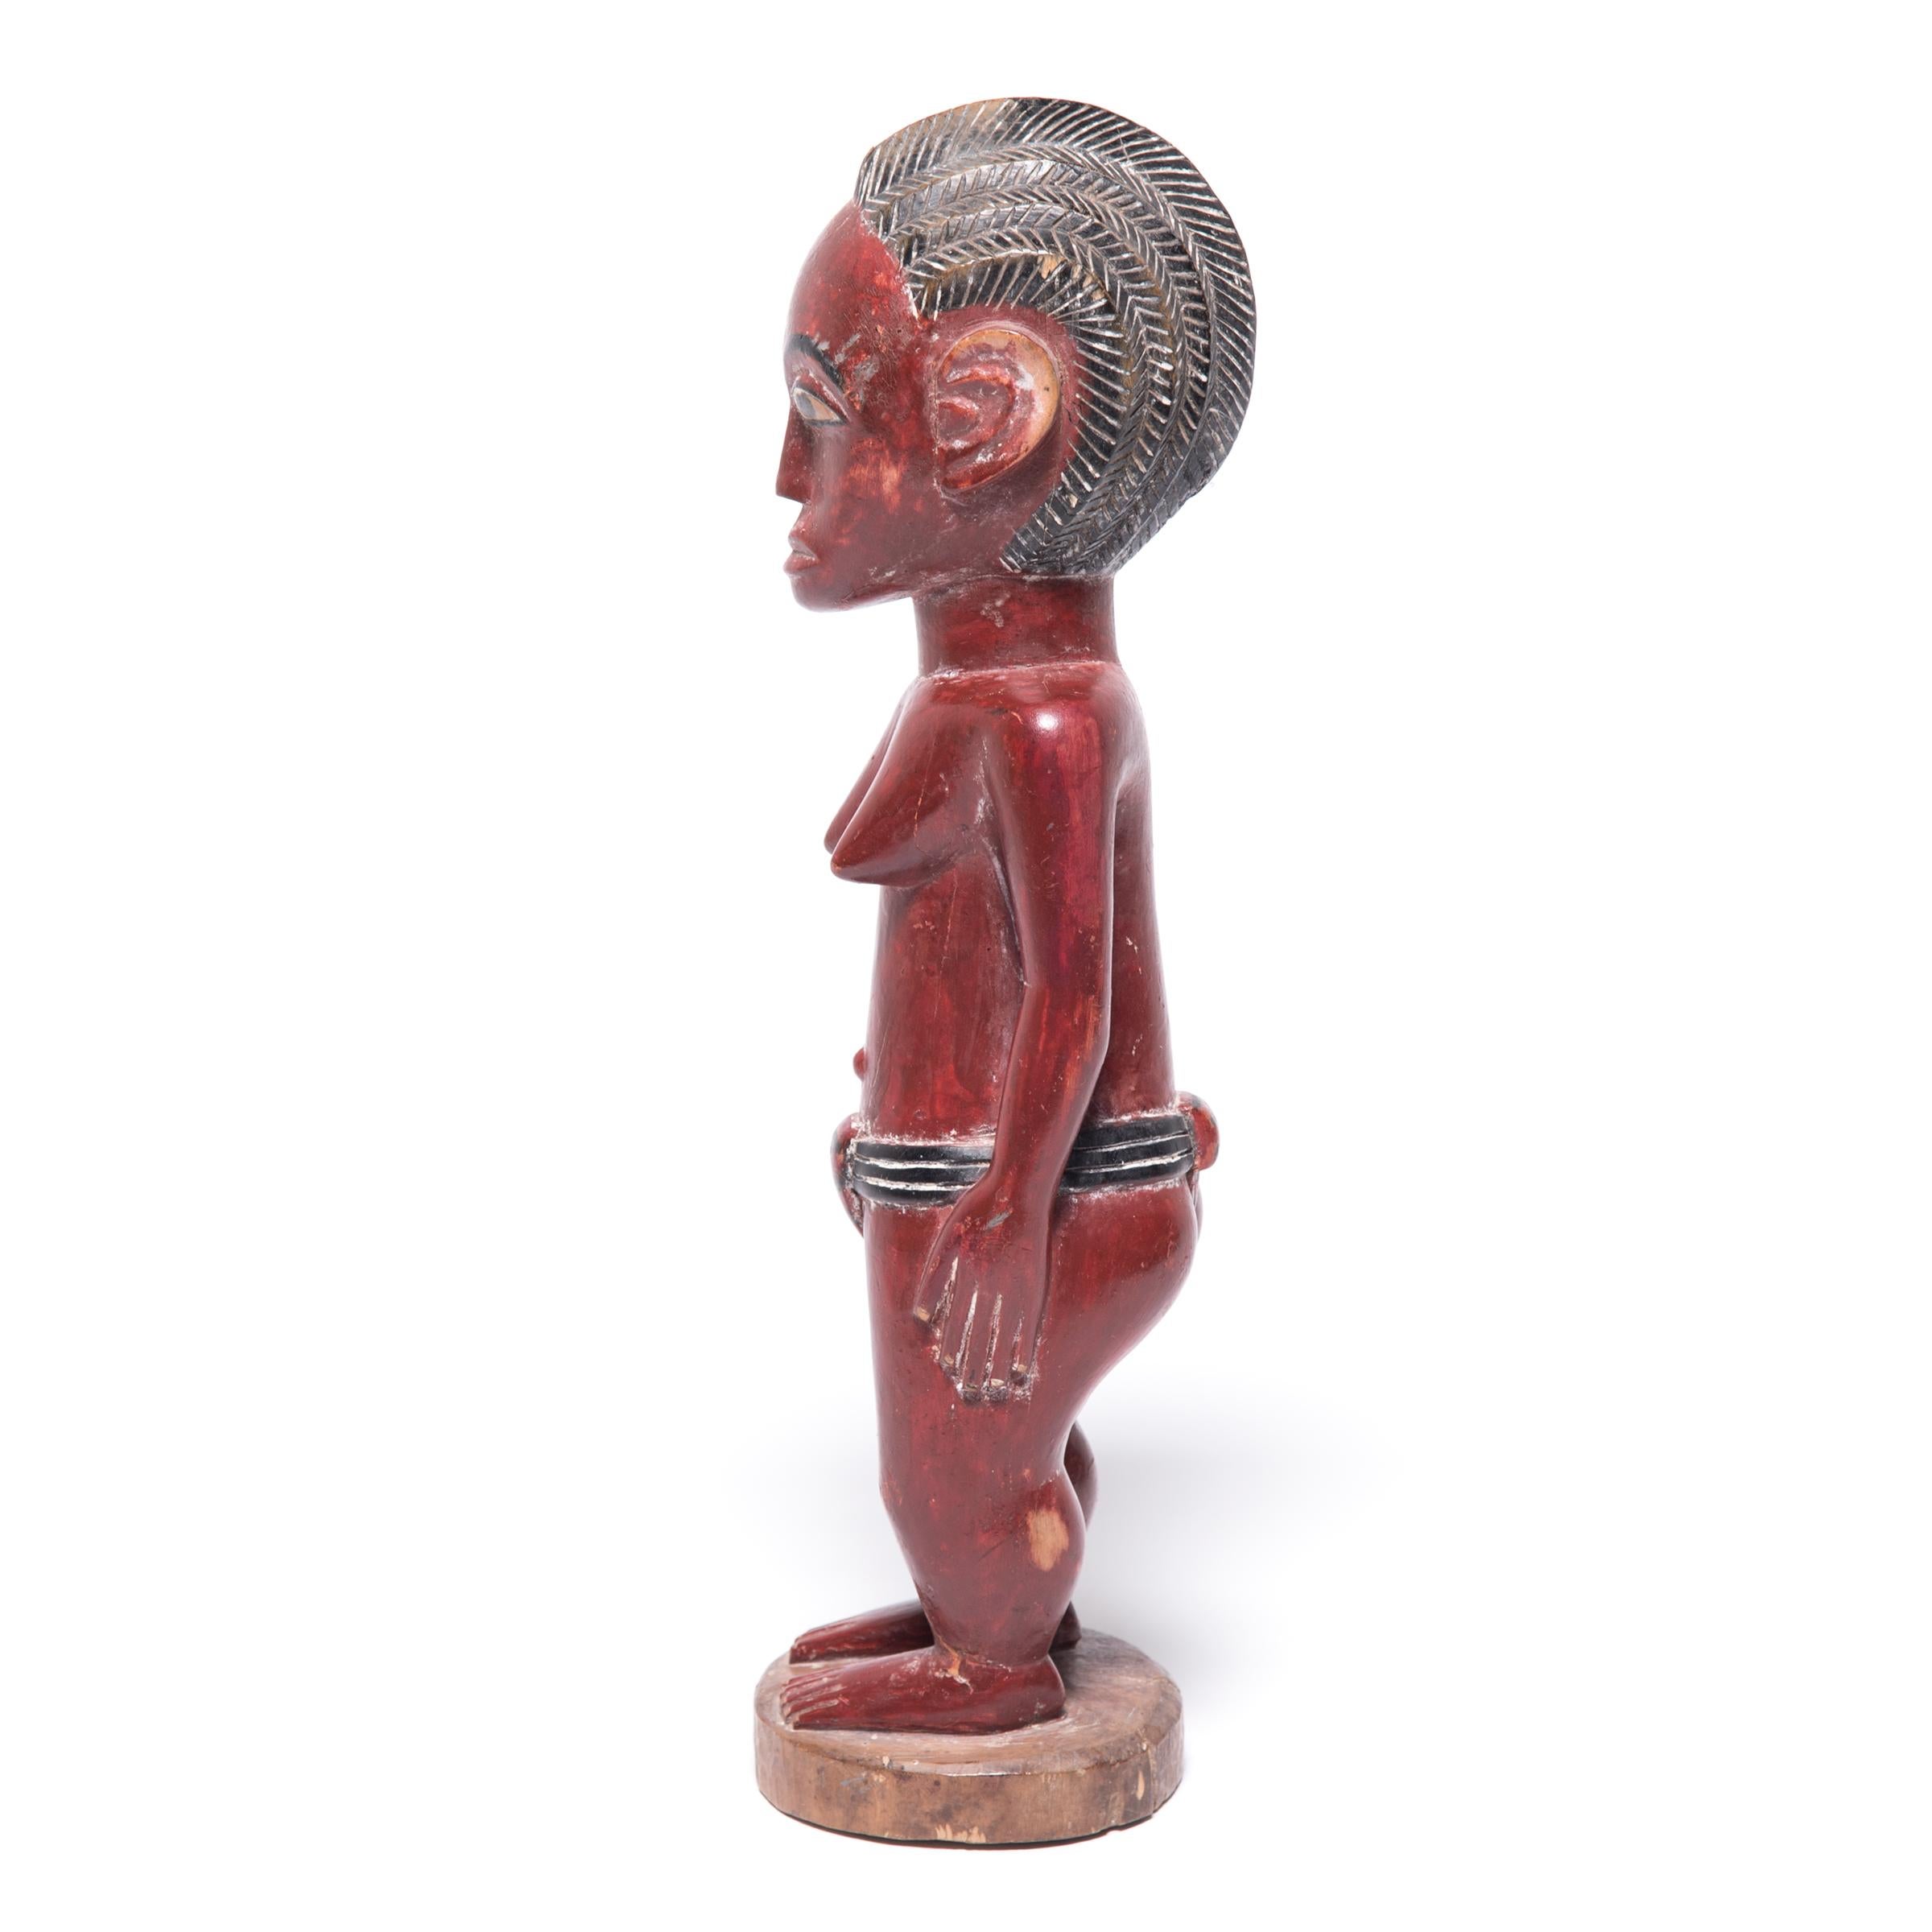 The figurative sculptures of the Baule peoples of Cote d'Ivoire are recognizable by their strong, gently curving forms and serene composure. This figure of a woman was carved to represent the spirit mate of a young Baule man. The Baule believe that